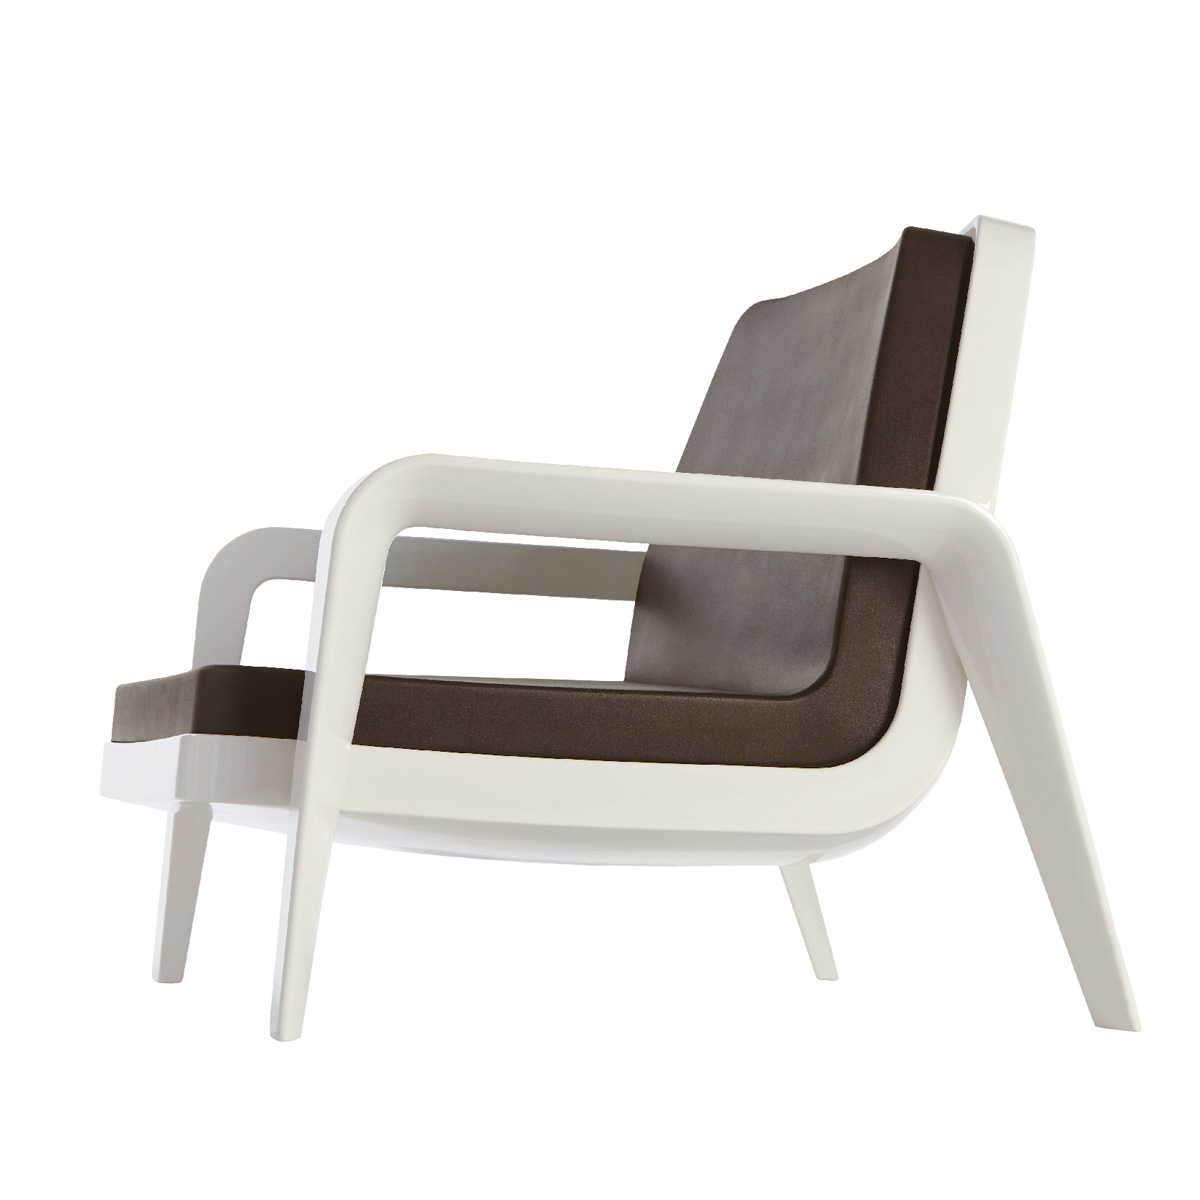 America lounge chair from Slide